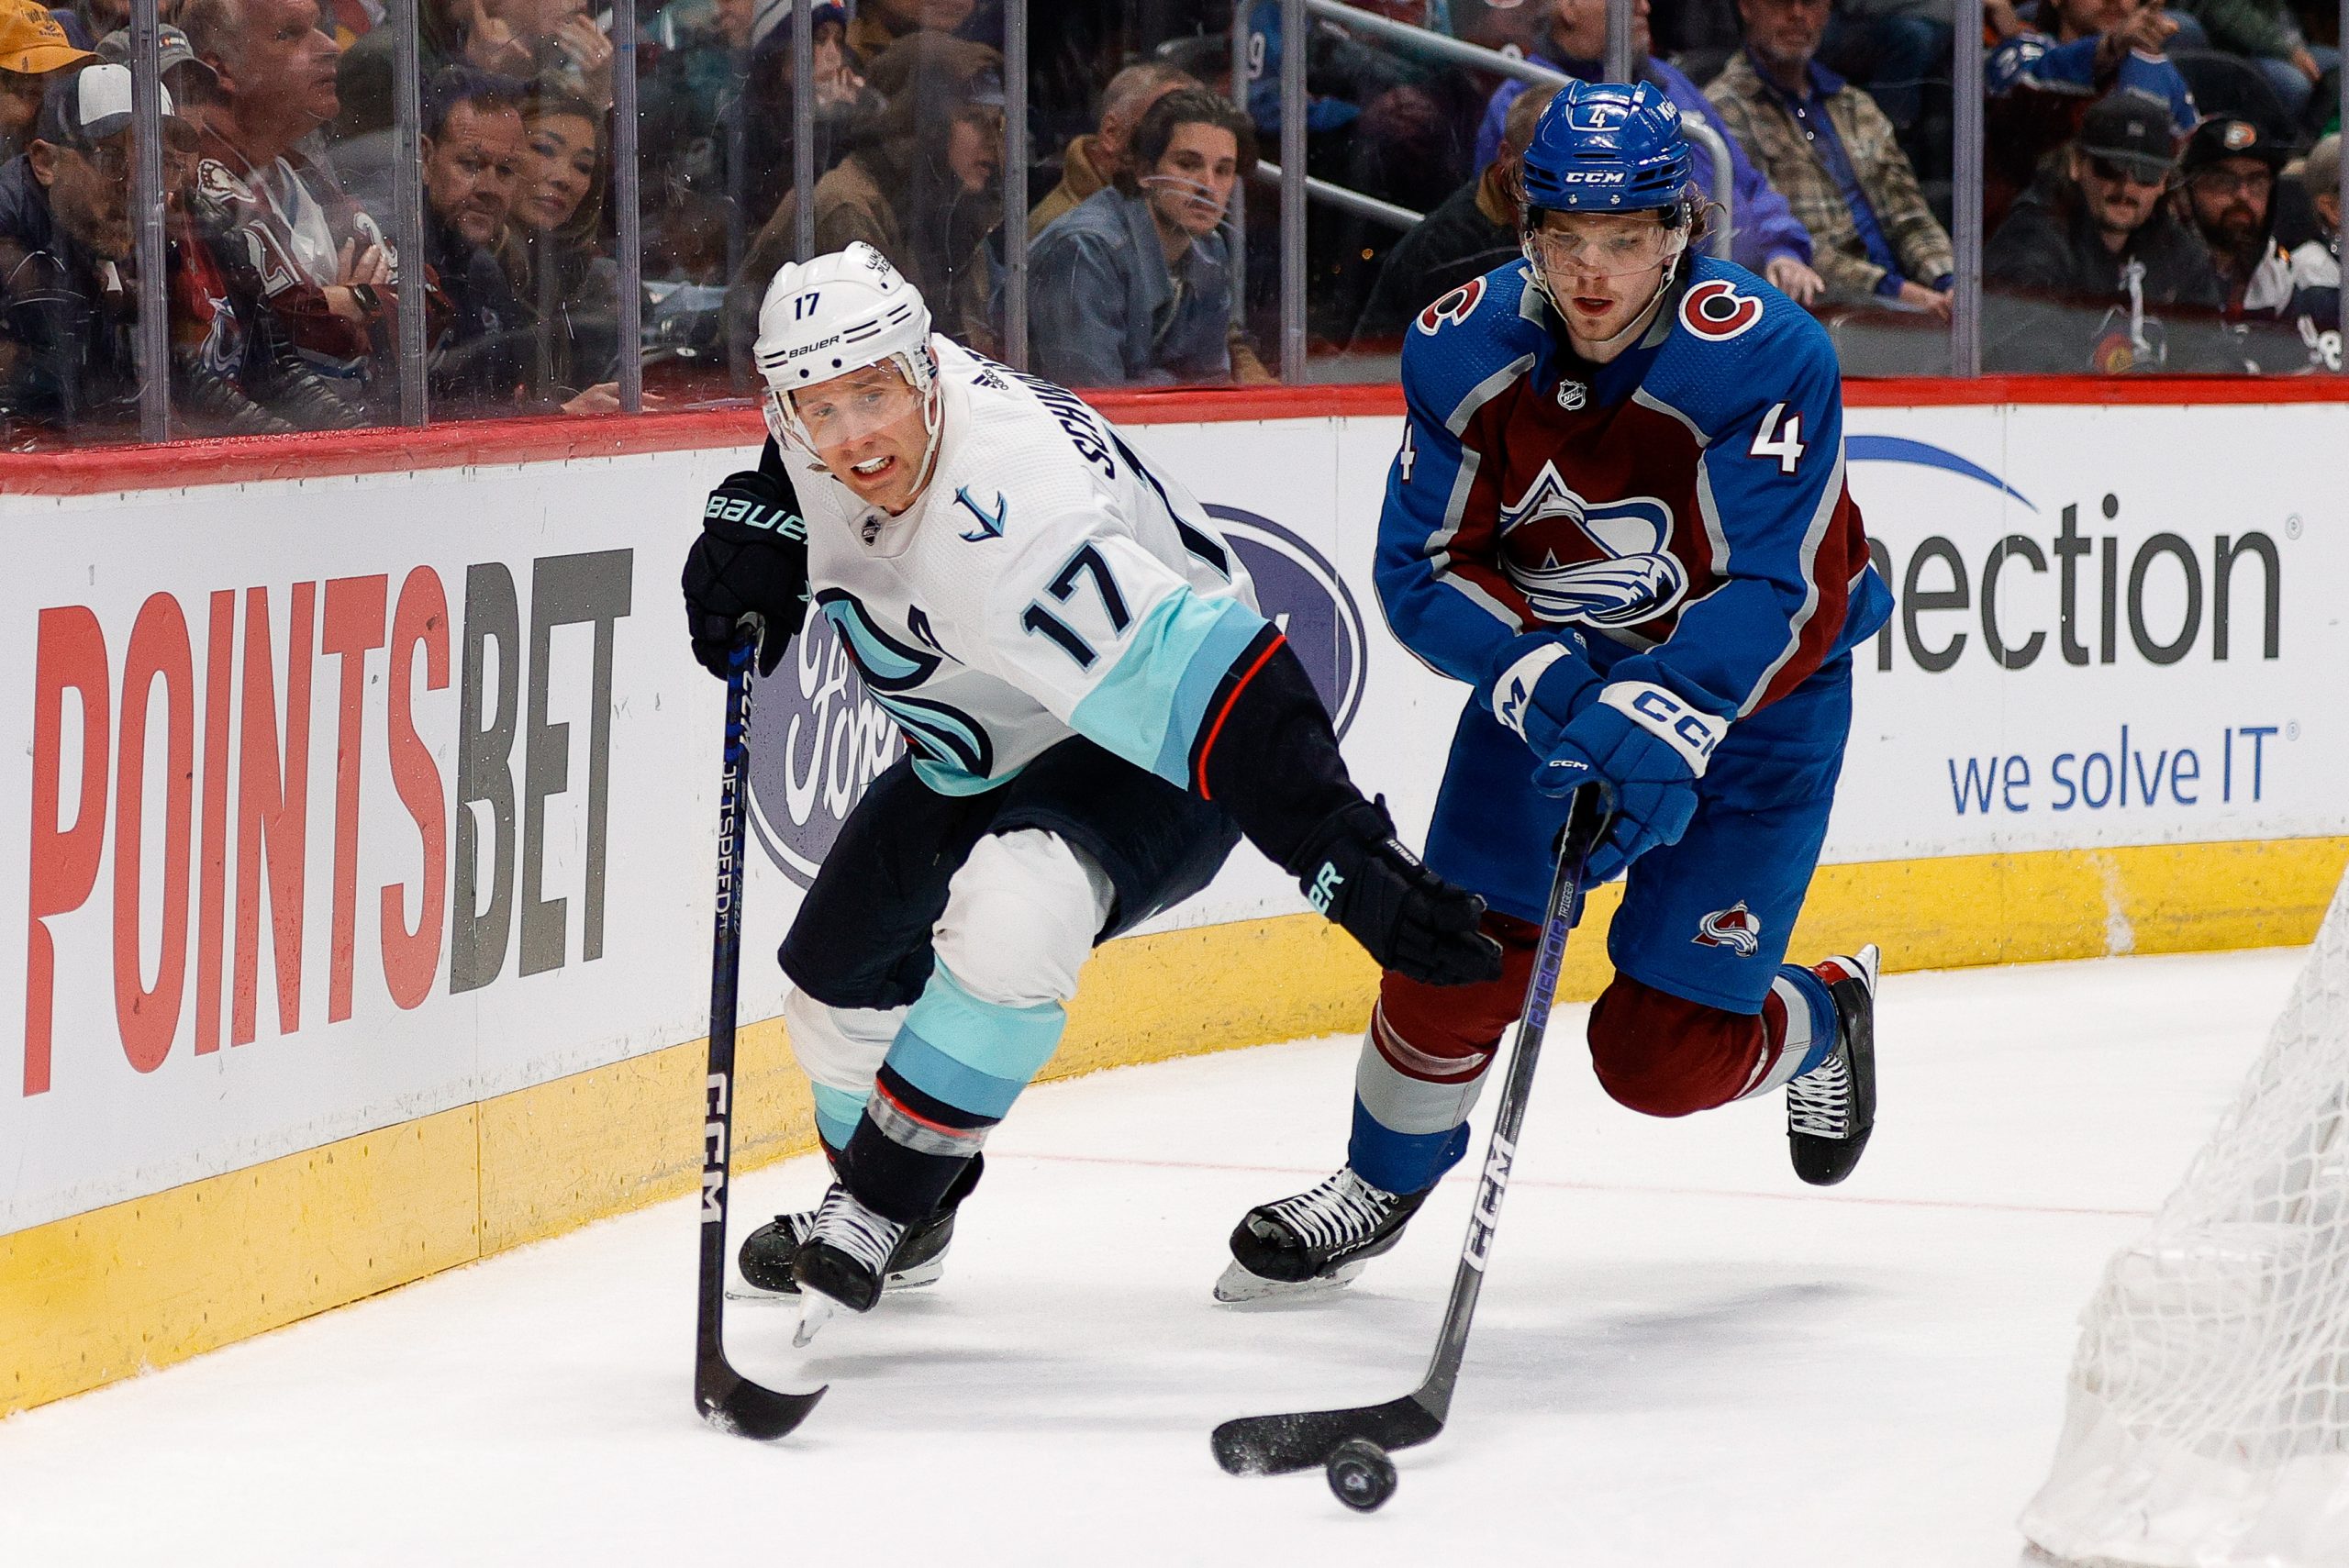 Game Preview: Colorado Avalanche play host to the Washington